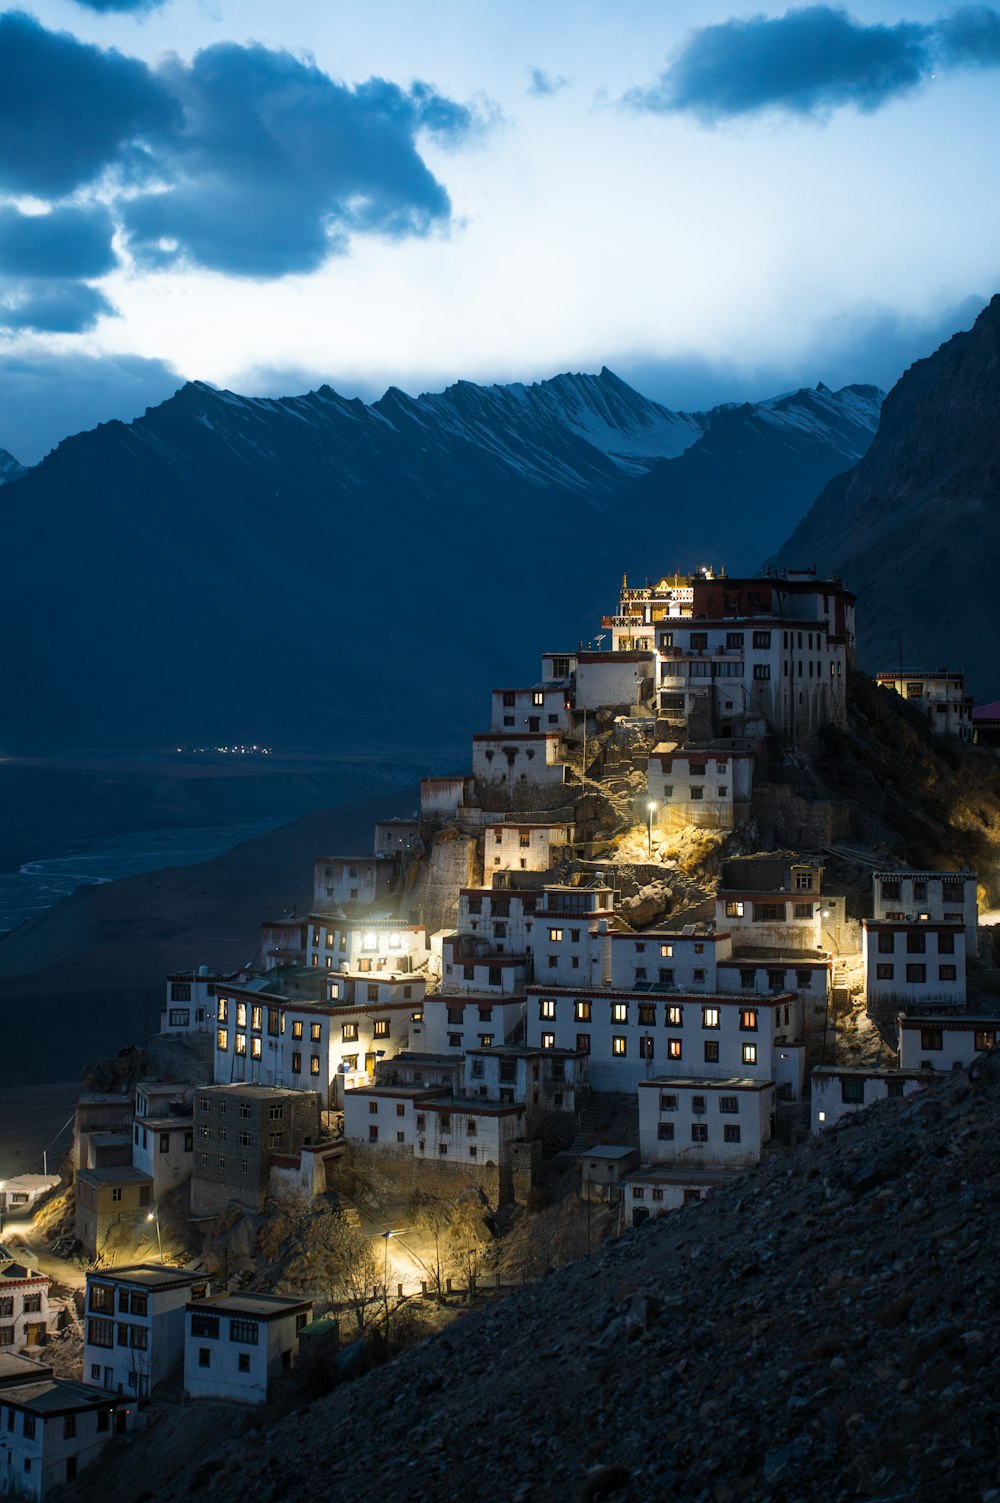 a mountain town lit up at night with mountains in the background